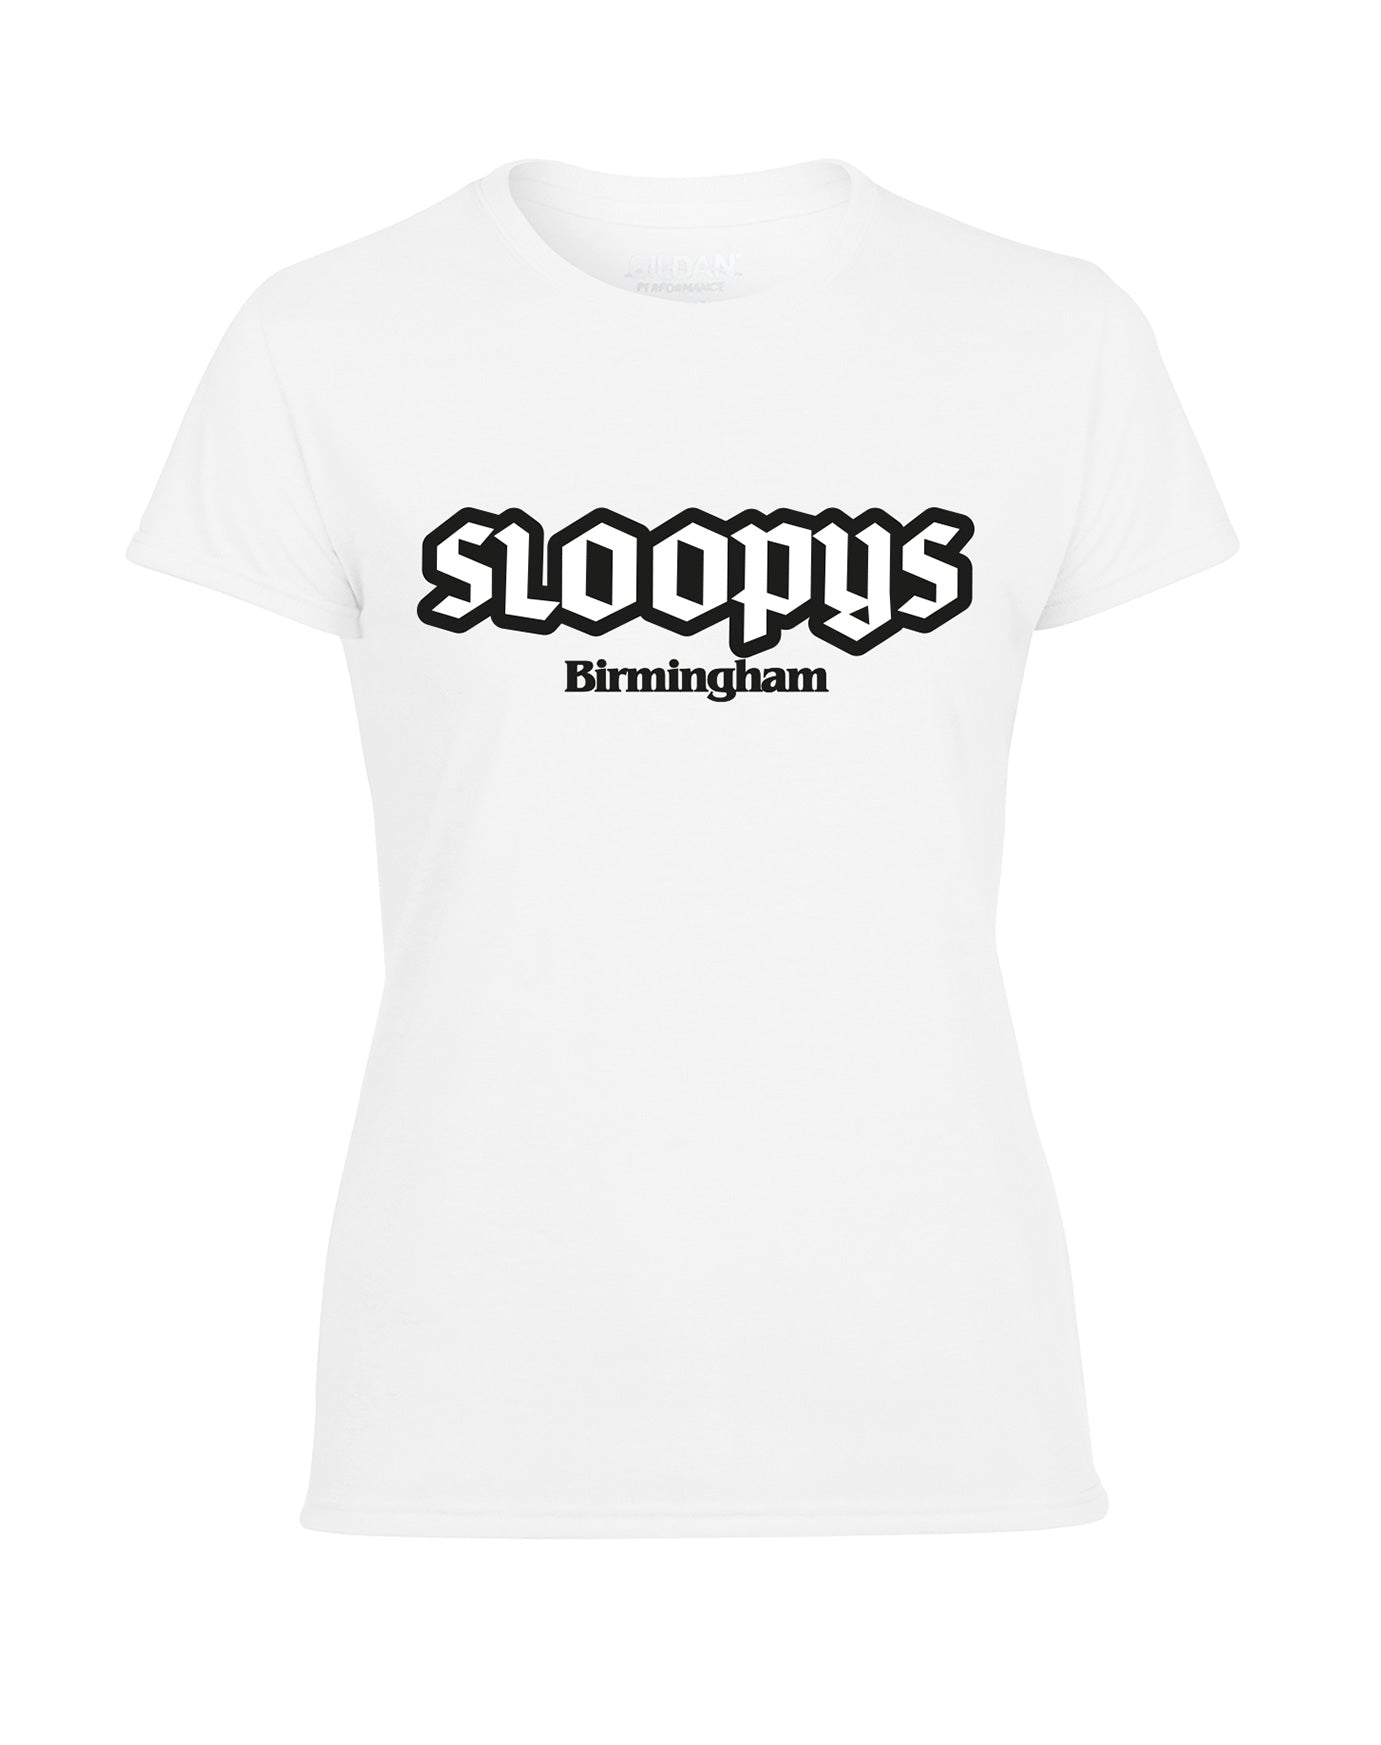 Sloopys ladies fit T-shirt - various colours - Dirty Stop Outs